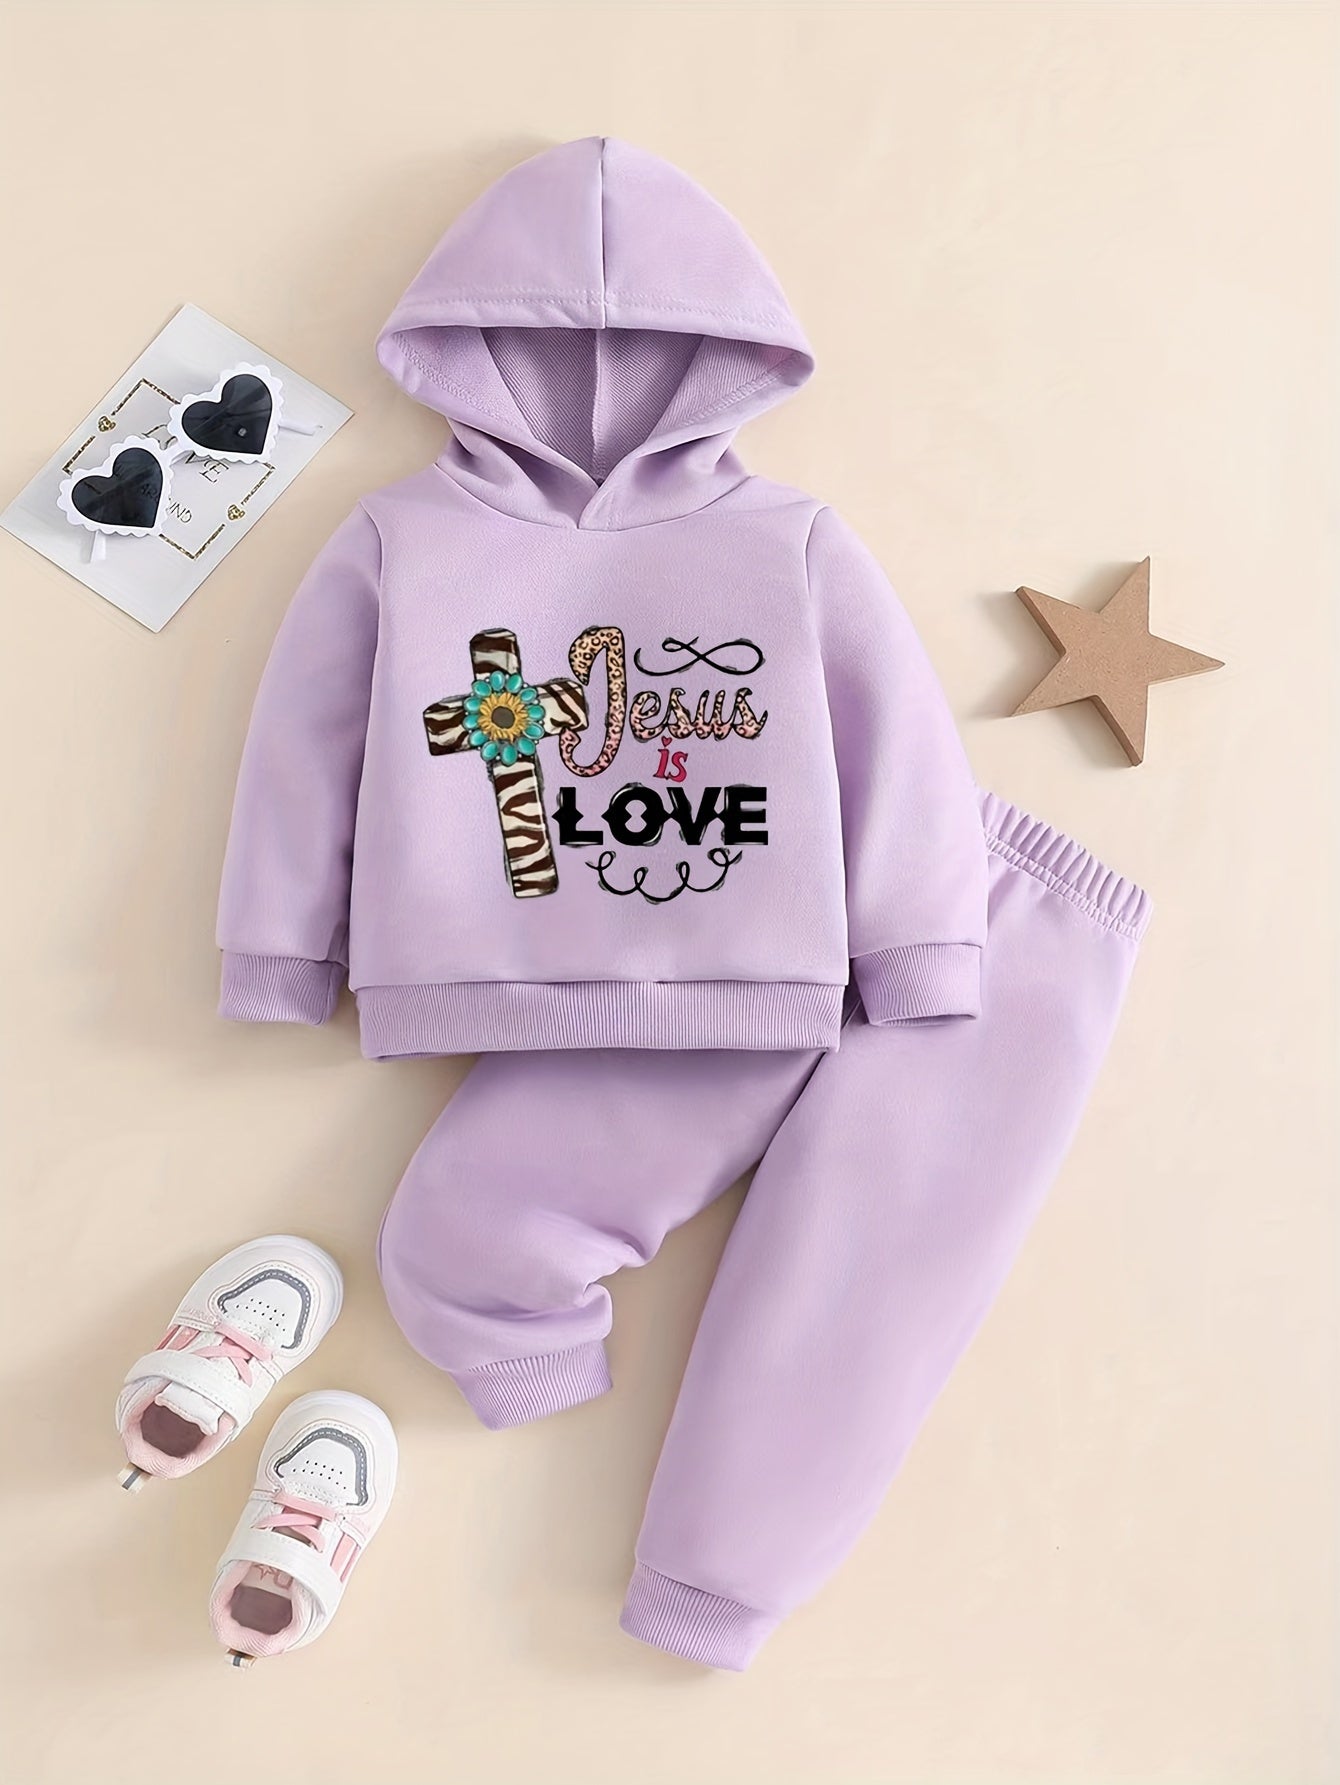 Jesus Is Love Youth Christian Casual Outfit claimedbygoddesigns